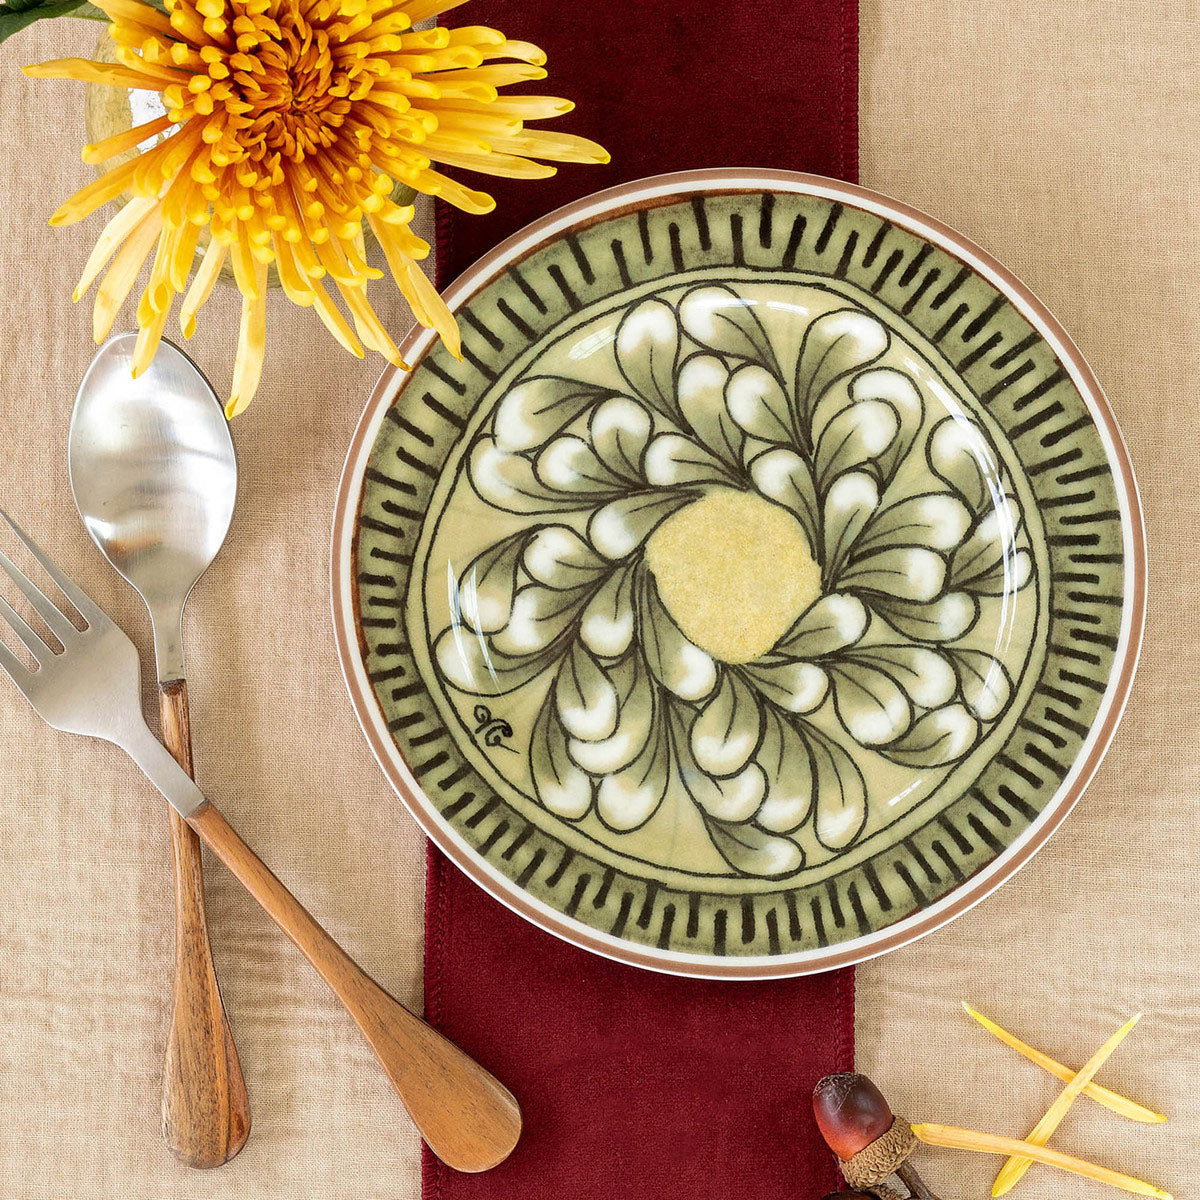 Roost Place Setting - Choose Plate Size